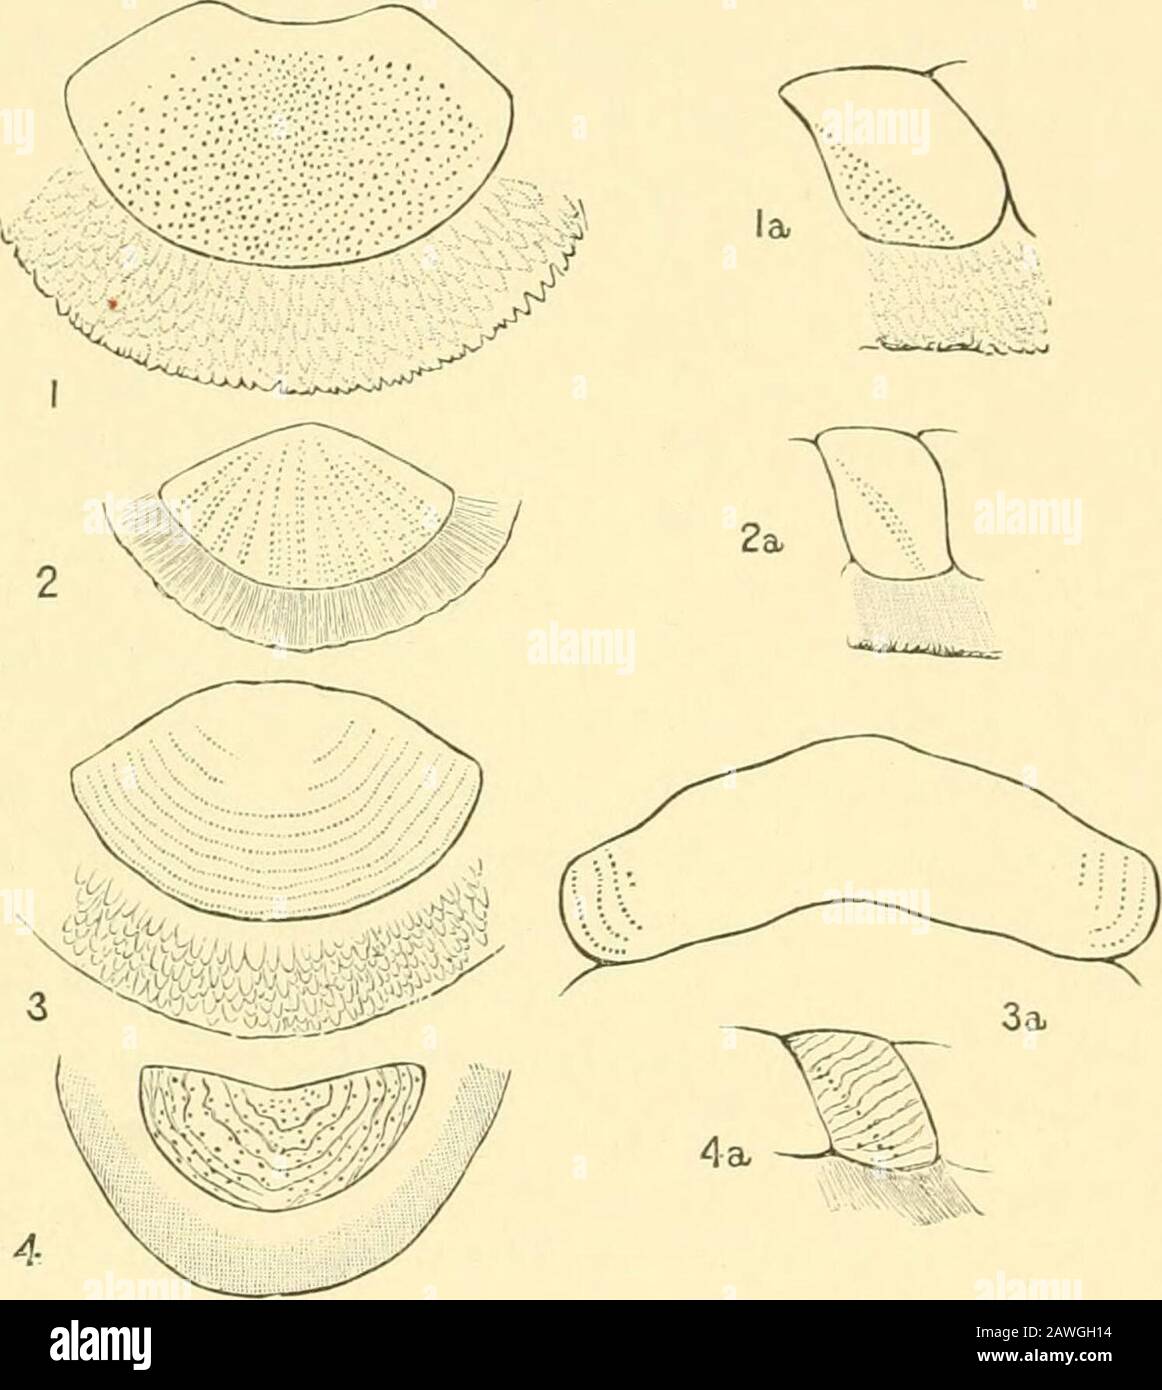 The Cambridge natural history . ll, which appeared to refract lightas if composed of glass or crystal. These eyes, in all the speciesof Chiton yet examined, are restricted to the outer sm-face of theexposed area of the shell, never being on the laminae of insertionor on the girdle. In certain sub-genera of Chiton the eyes arescattered irregularly over the surface, in others they are arranged Animal Life, p. 372 f. - Bergli, Morph. Jahrh. x. p. lll. ? ^ Ann. Mag, Nat. Hist. (5) xiv. ]). 141. i88 EYES OF CHITON symmetrically in rows diverging from the apex of each plate, Itutin old specimens the Stock Photo